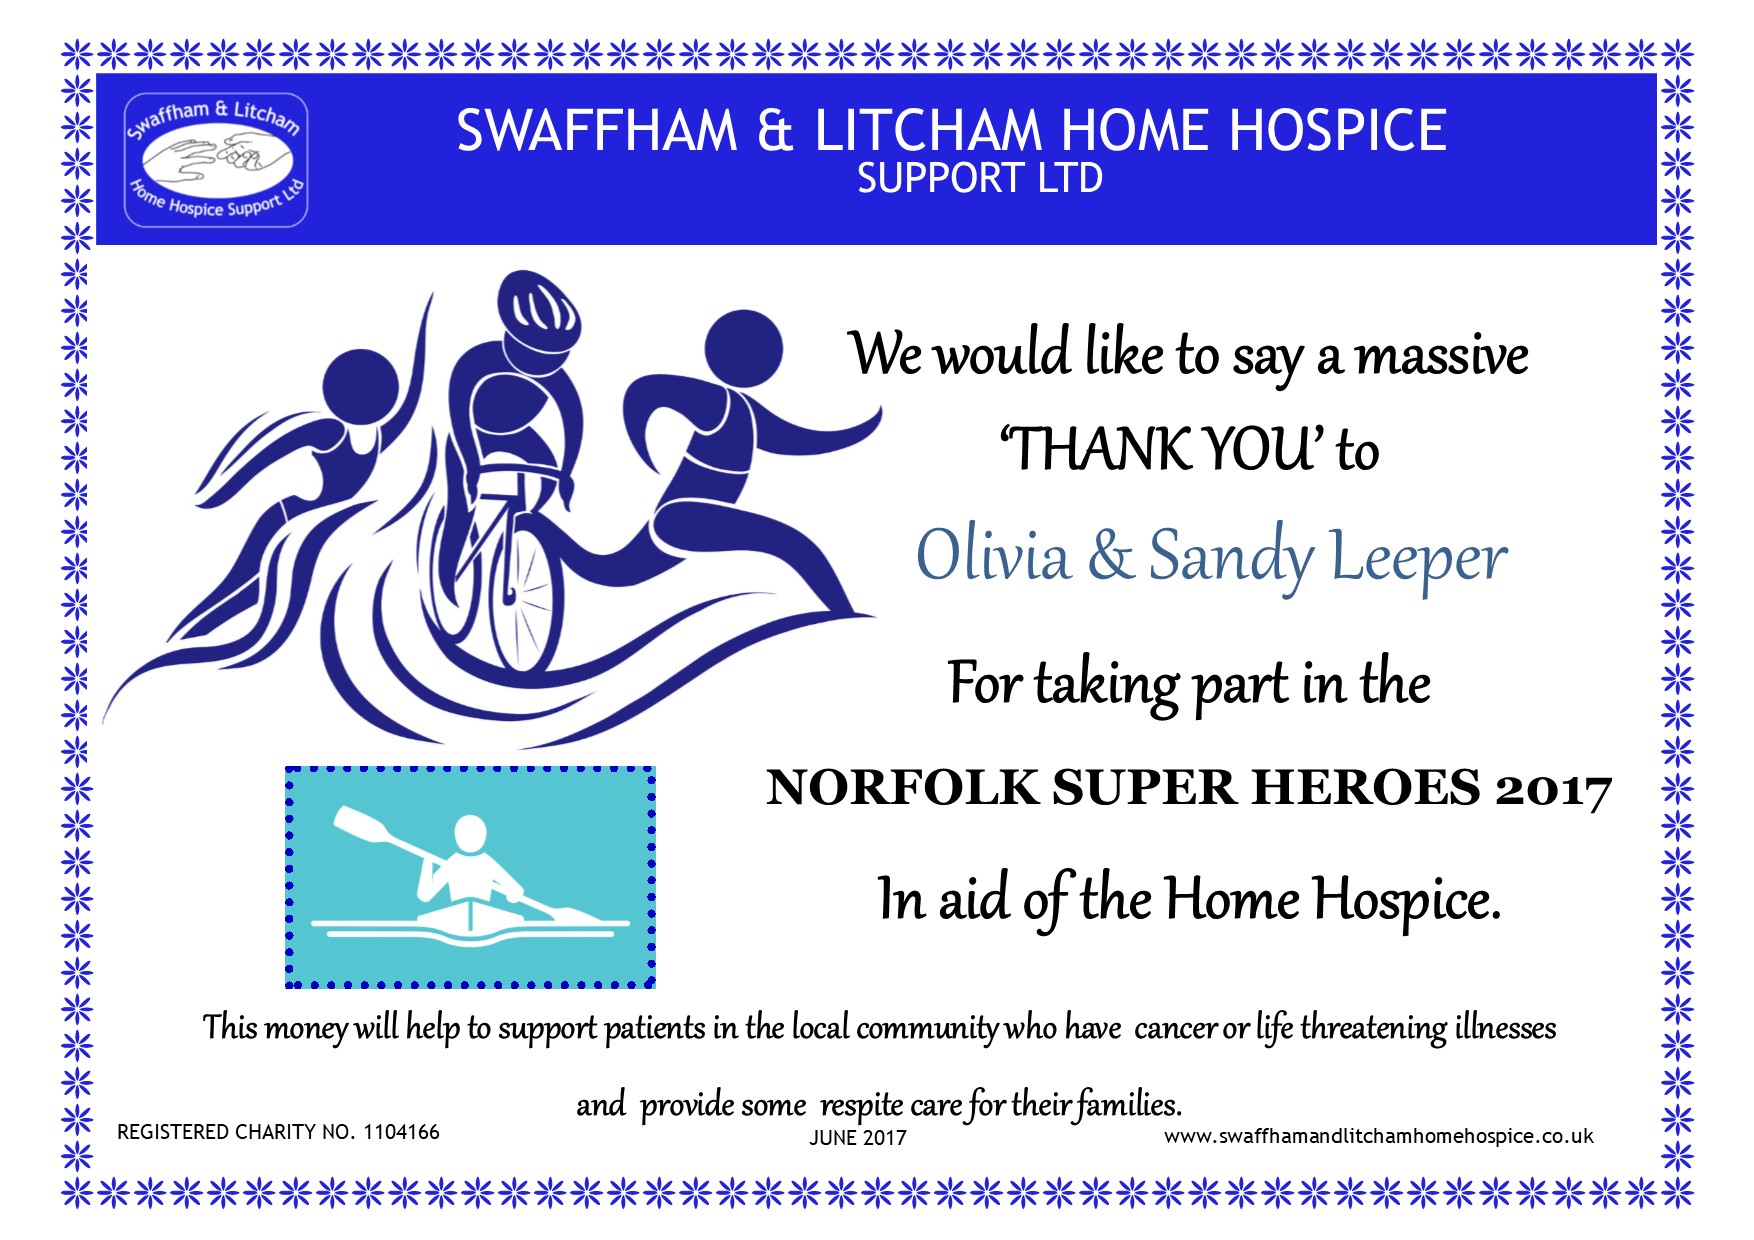 Thanks to Olivia and Sandy Leeper who took part in Norfolk Super Heroes, June 2017